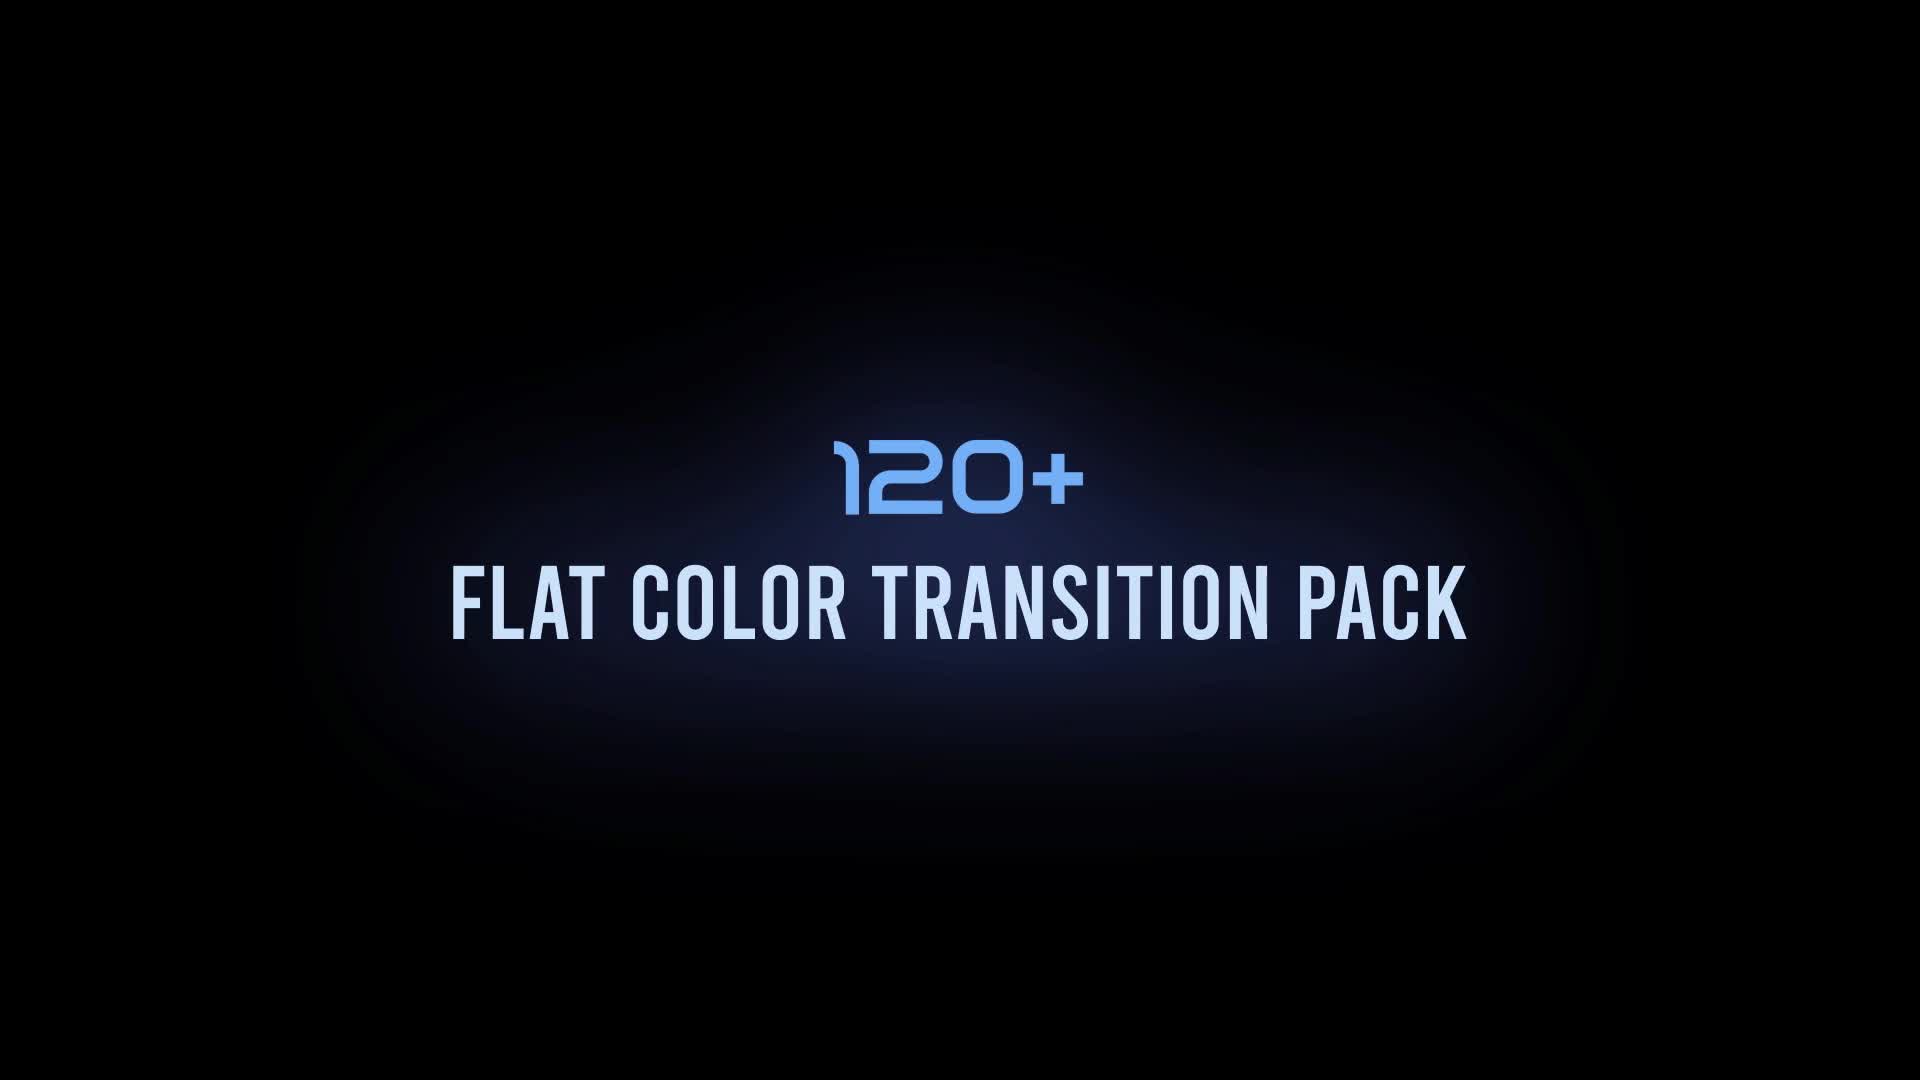 after effects transitions pack download